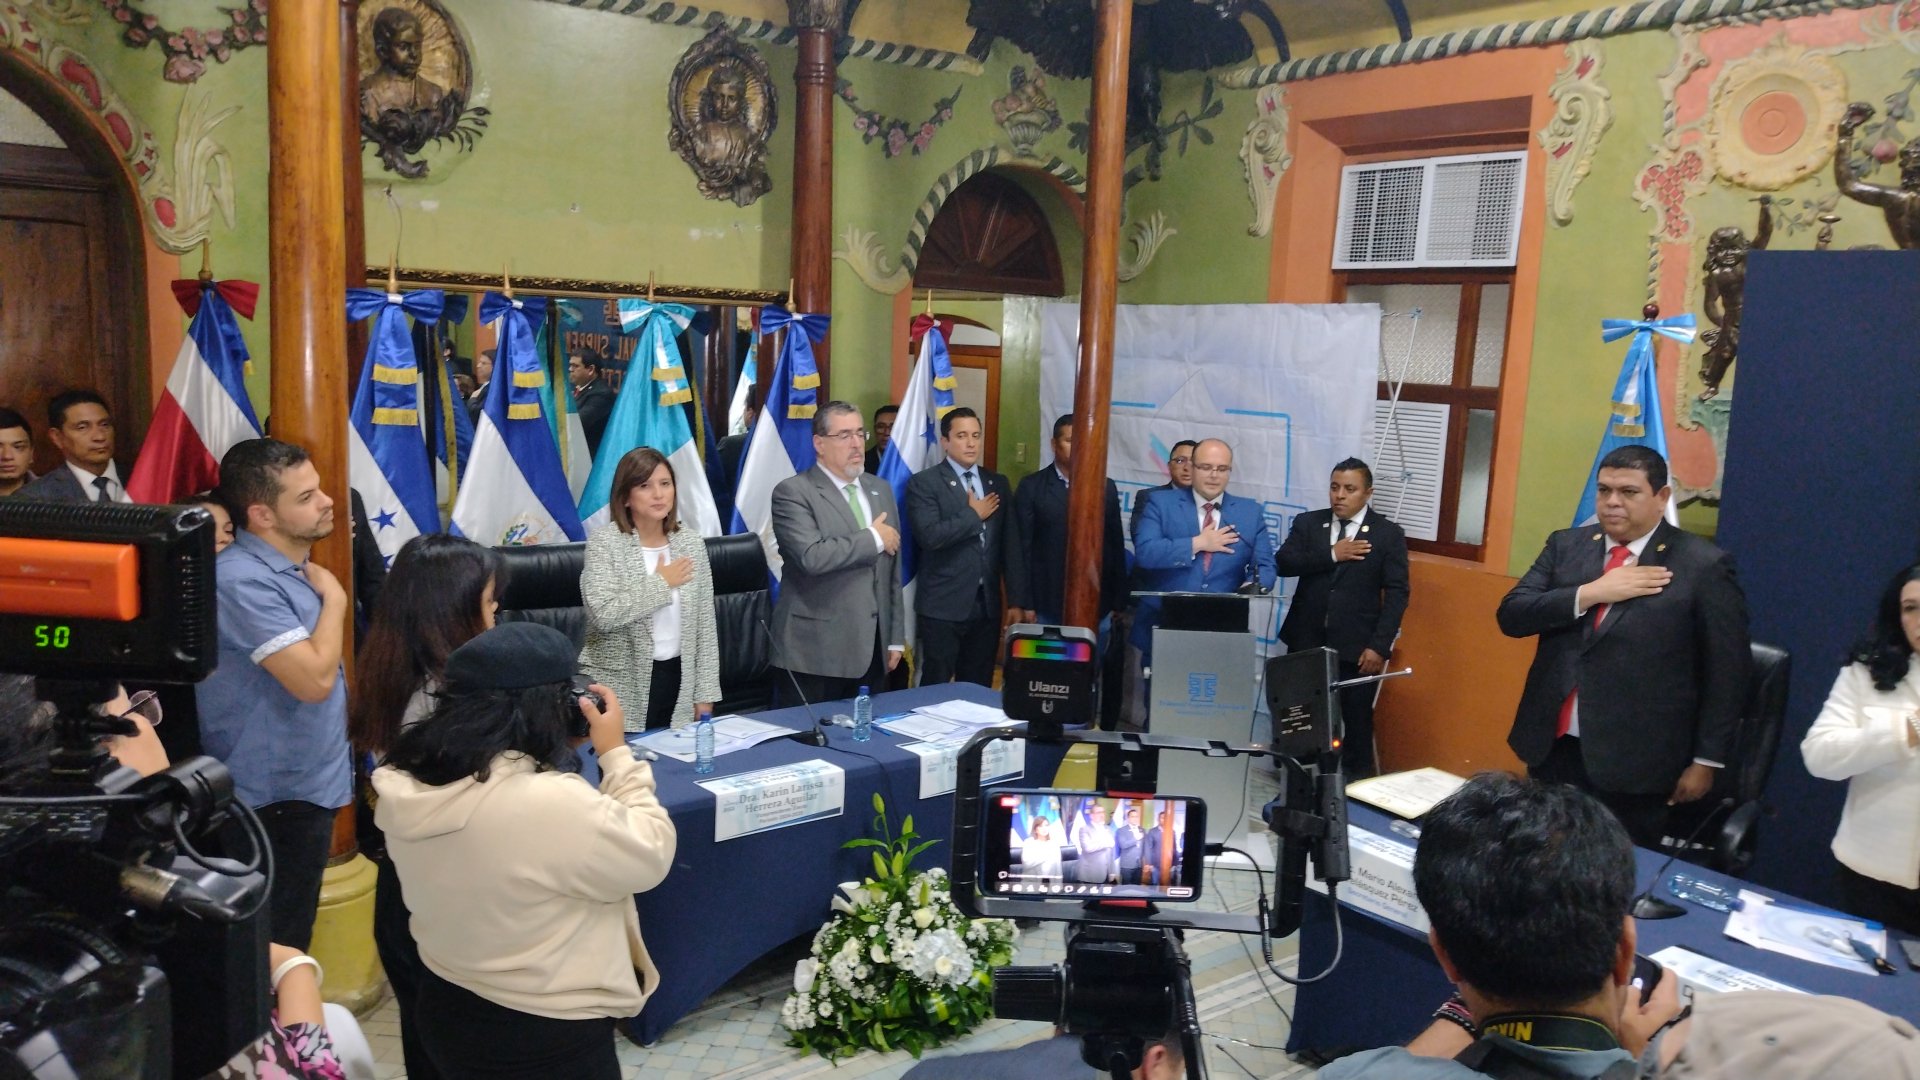 Arévalo is accredited as president-elect of Guatemala